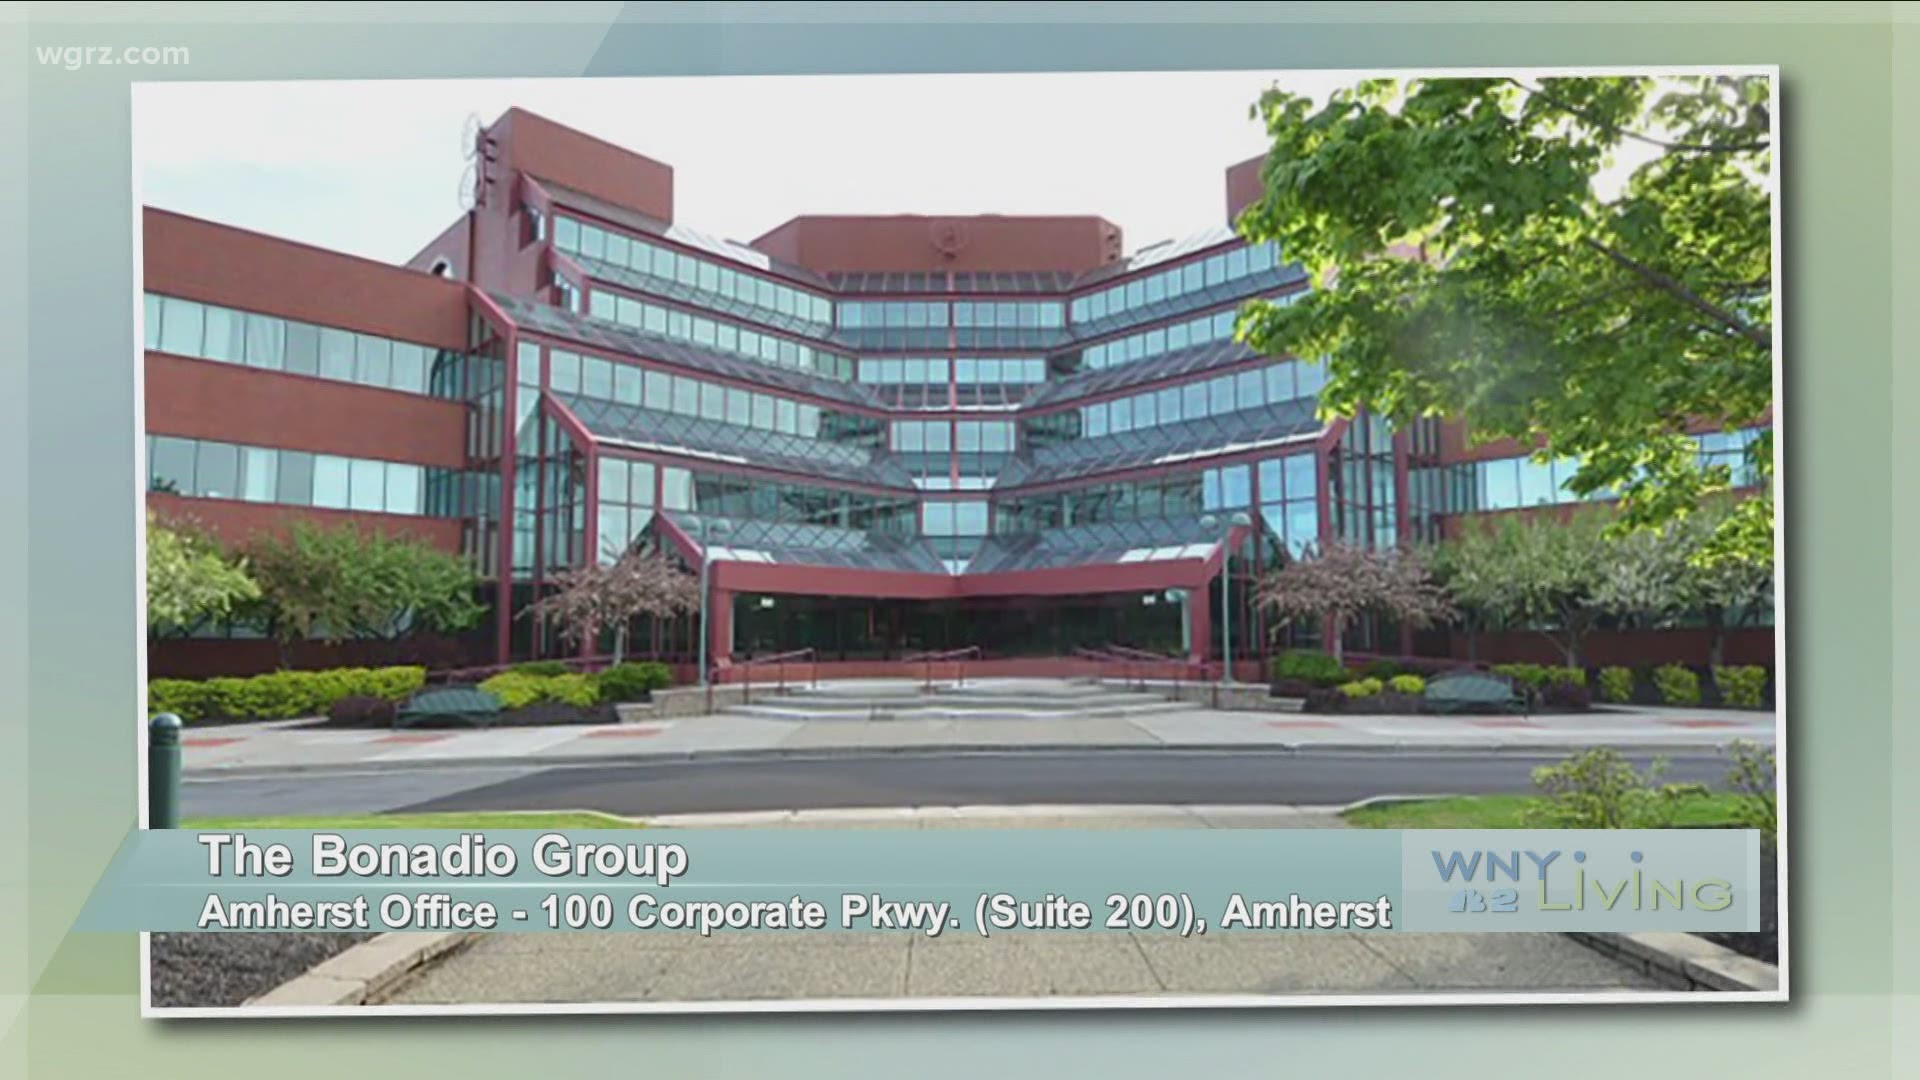 WNY Living - April 3 - The Bonadio Group (THIS VIDEO IS SPONSORED BY THE BONADIO GROUP)